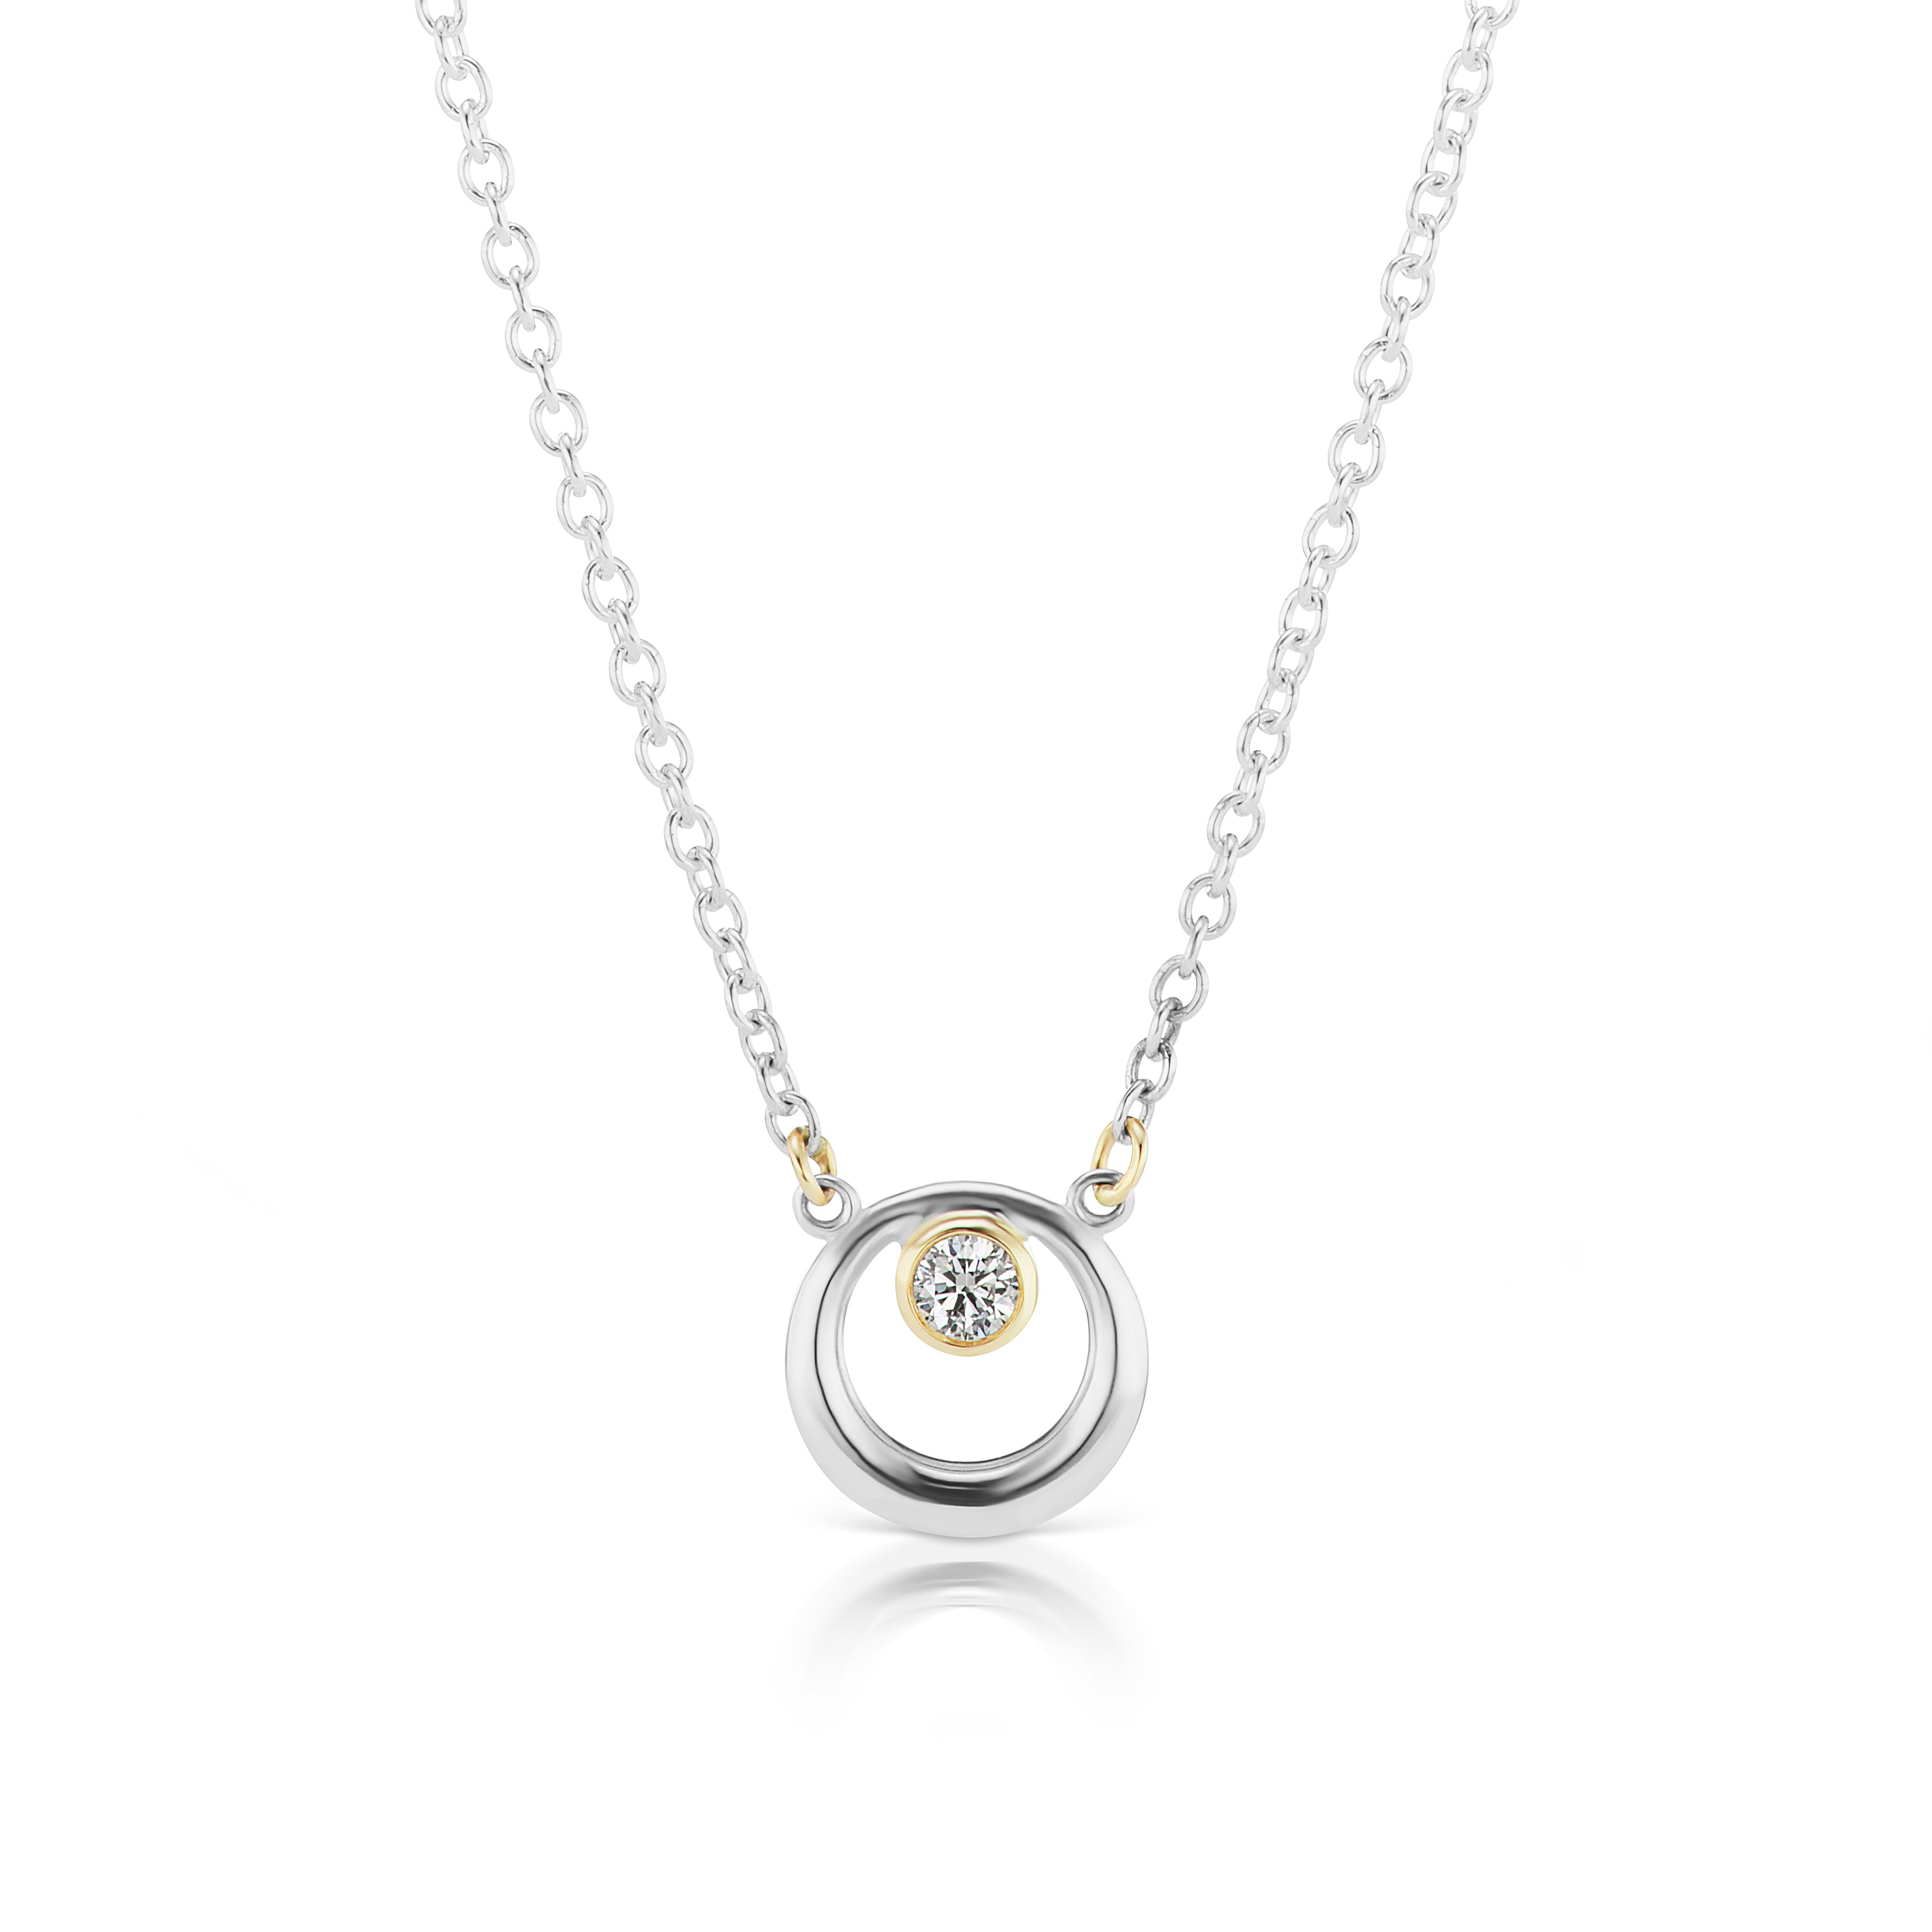 The Silver Everyday Diamond Necklace